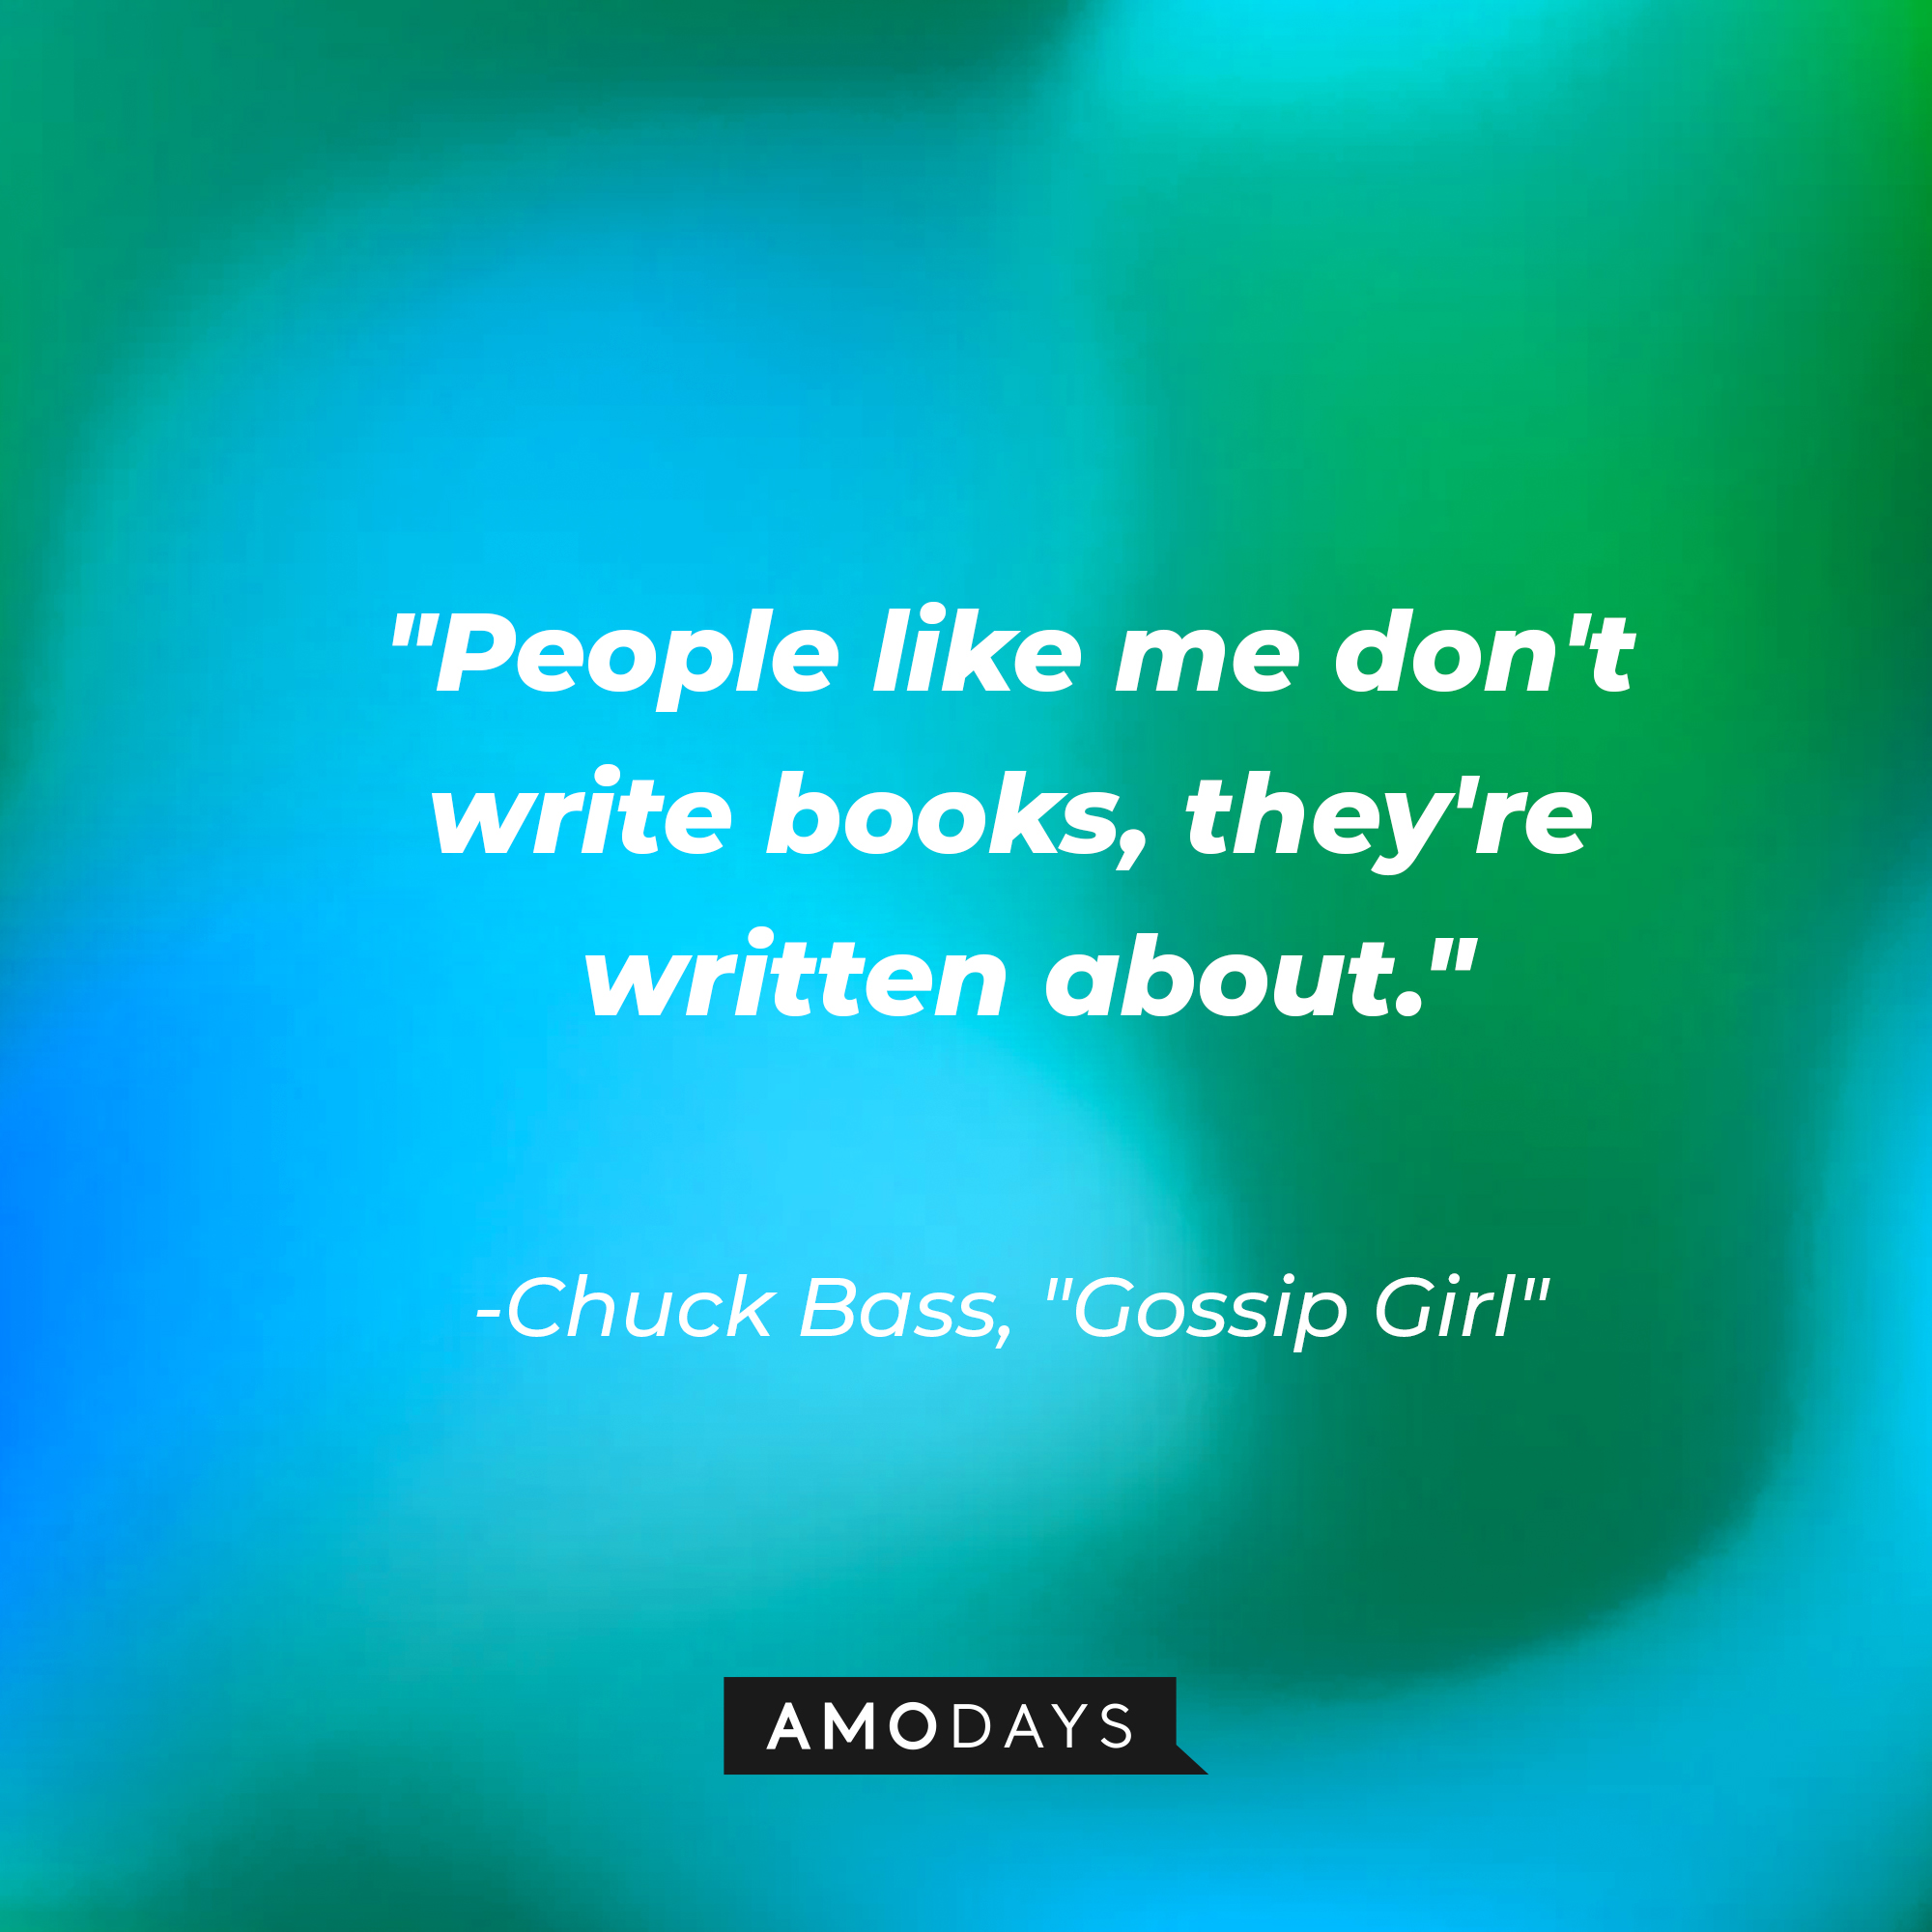 Chuck Bass' quote: "People like me don't write books, they're written about." | Source: AmoDays